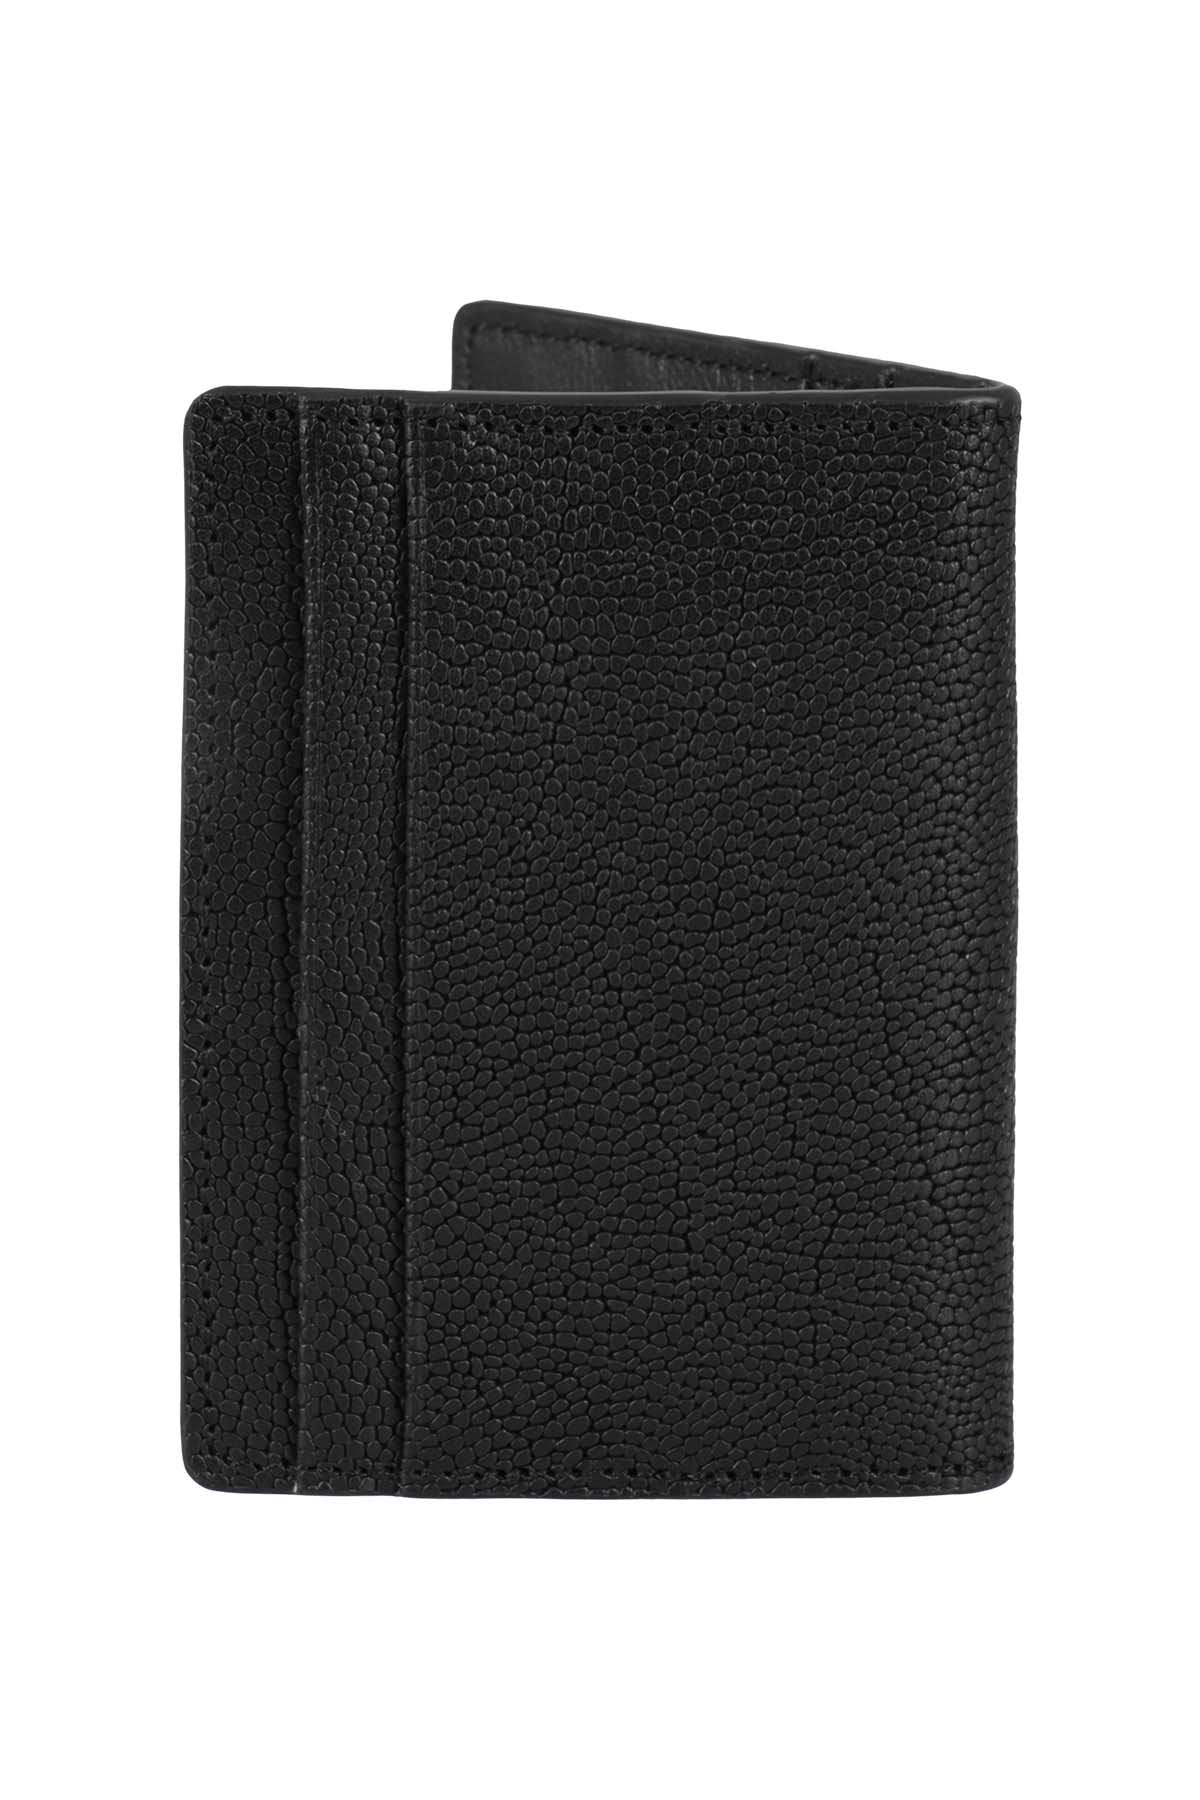 Orciani Wallet